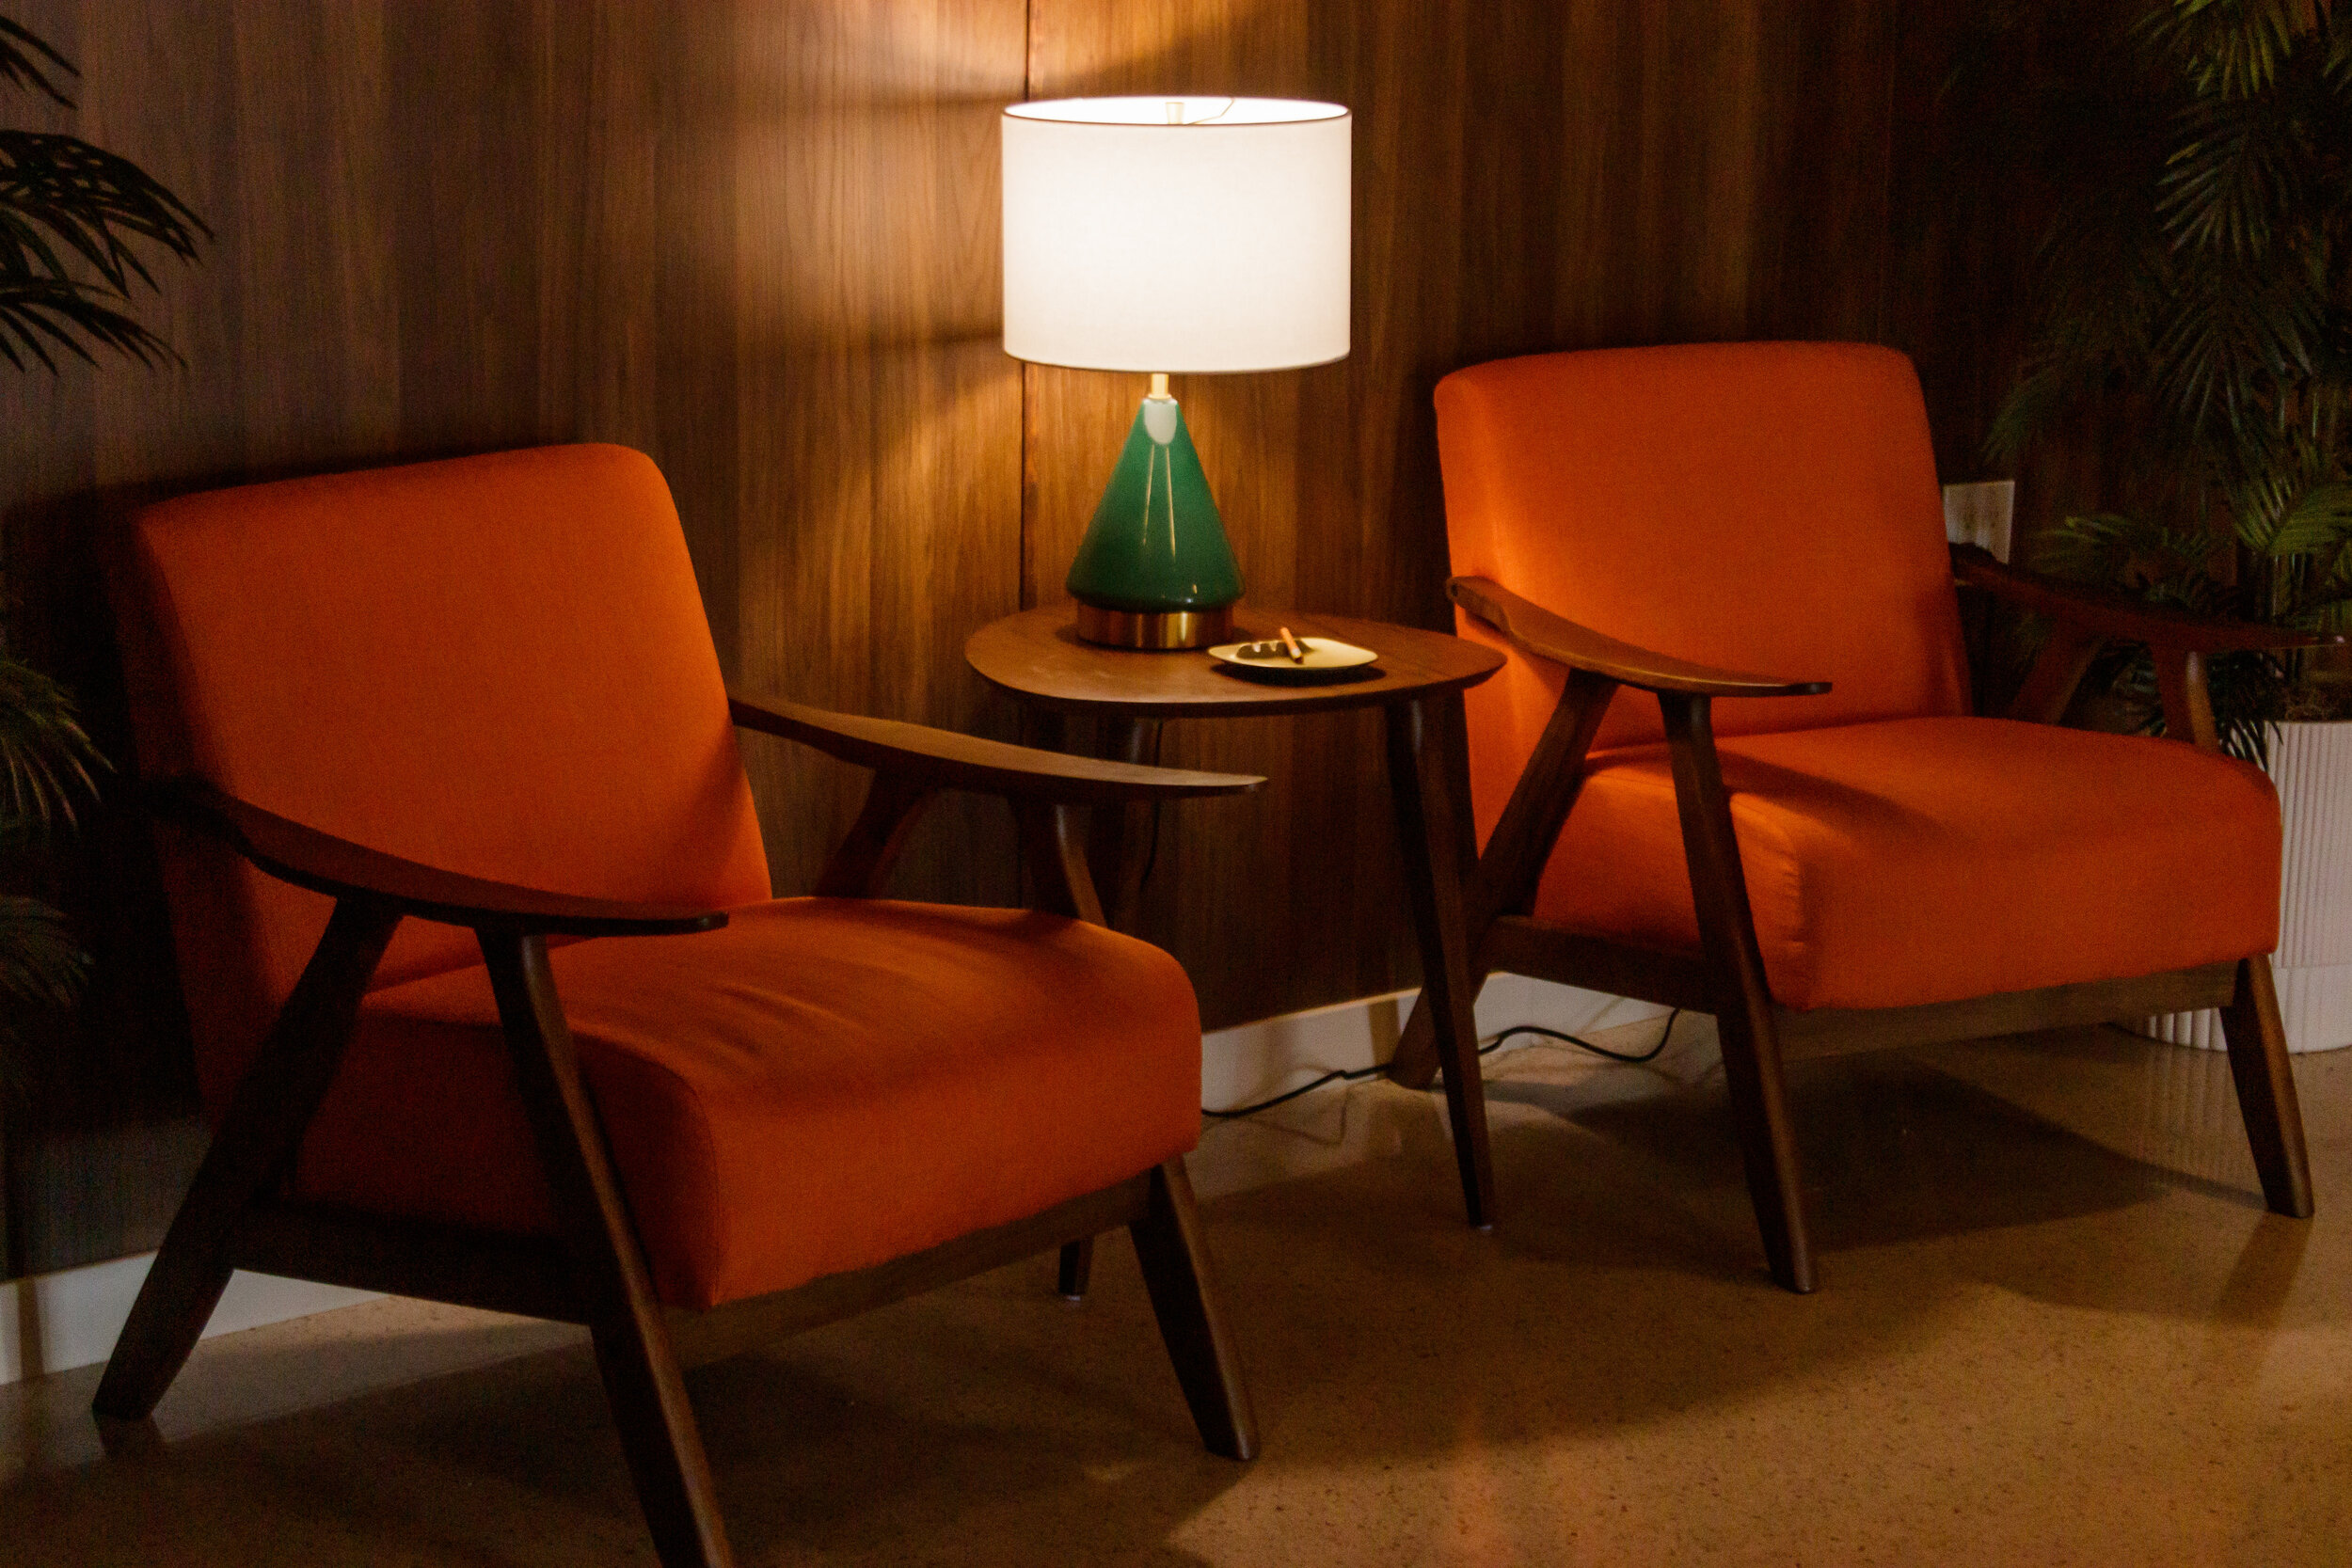   Mid-century modern furniture at the Madcap Motel, in downtown Los Angeles, Calif., on Saturday, May 8, 2021. Marco Pallotti | The Corsair  